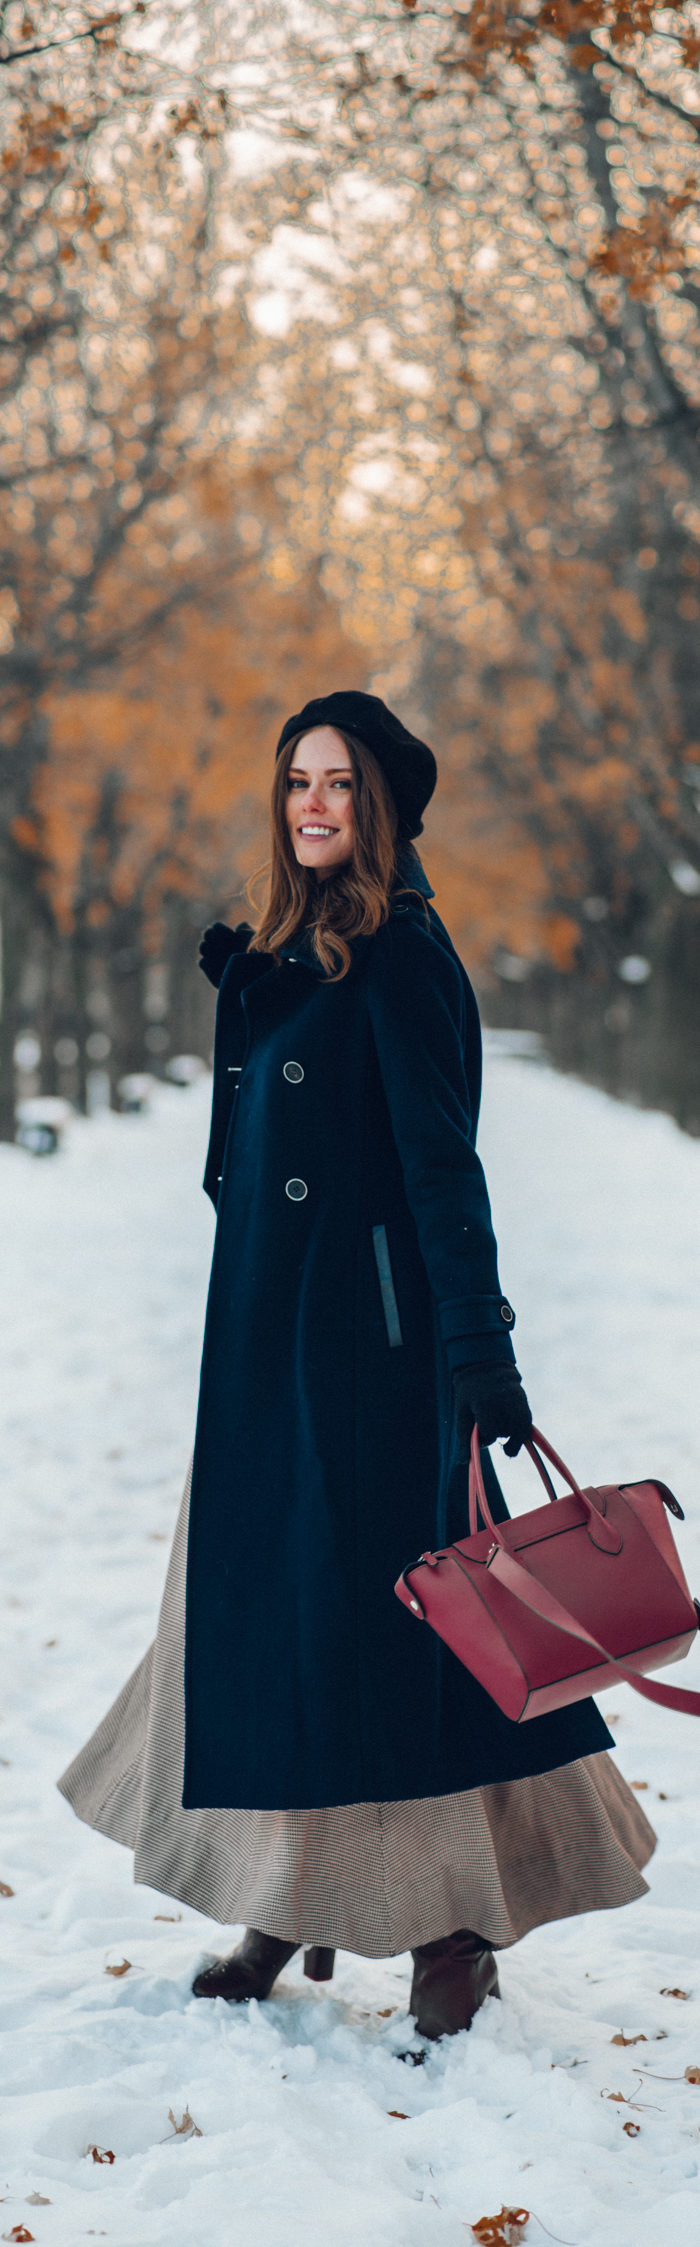 Alyssa Campanella of The A List blog wears Mackage Elodie coat and Christy Dawn Ida skirt for a weekend in Vieux-Montréal